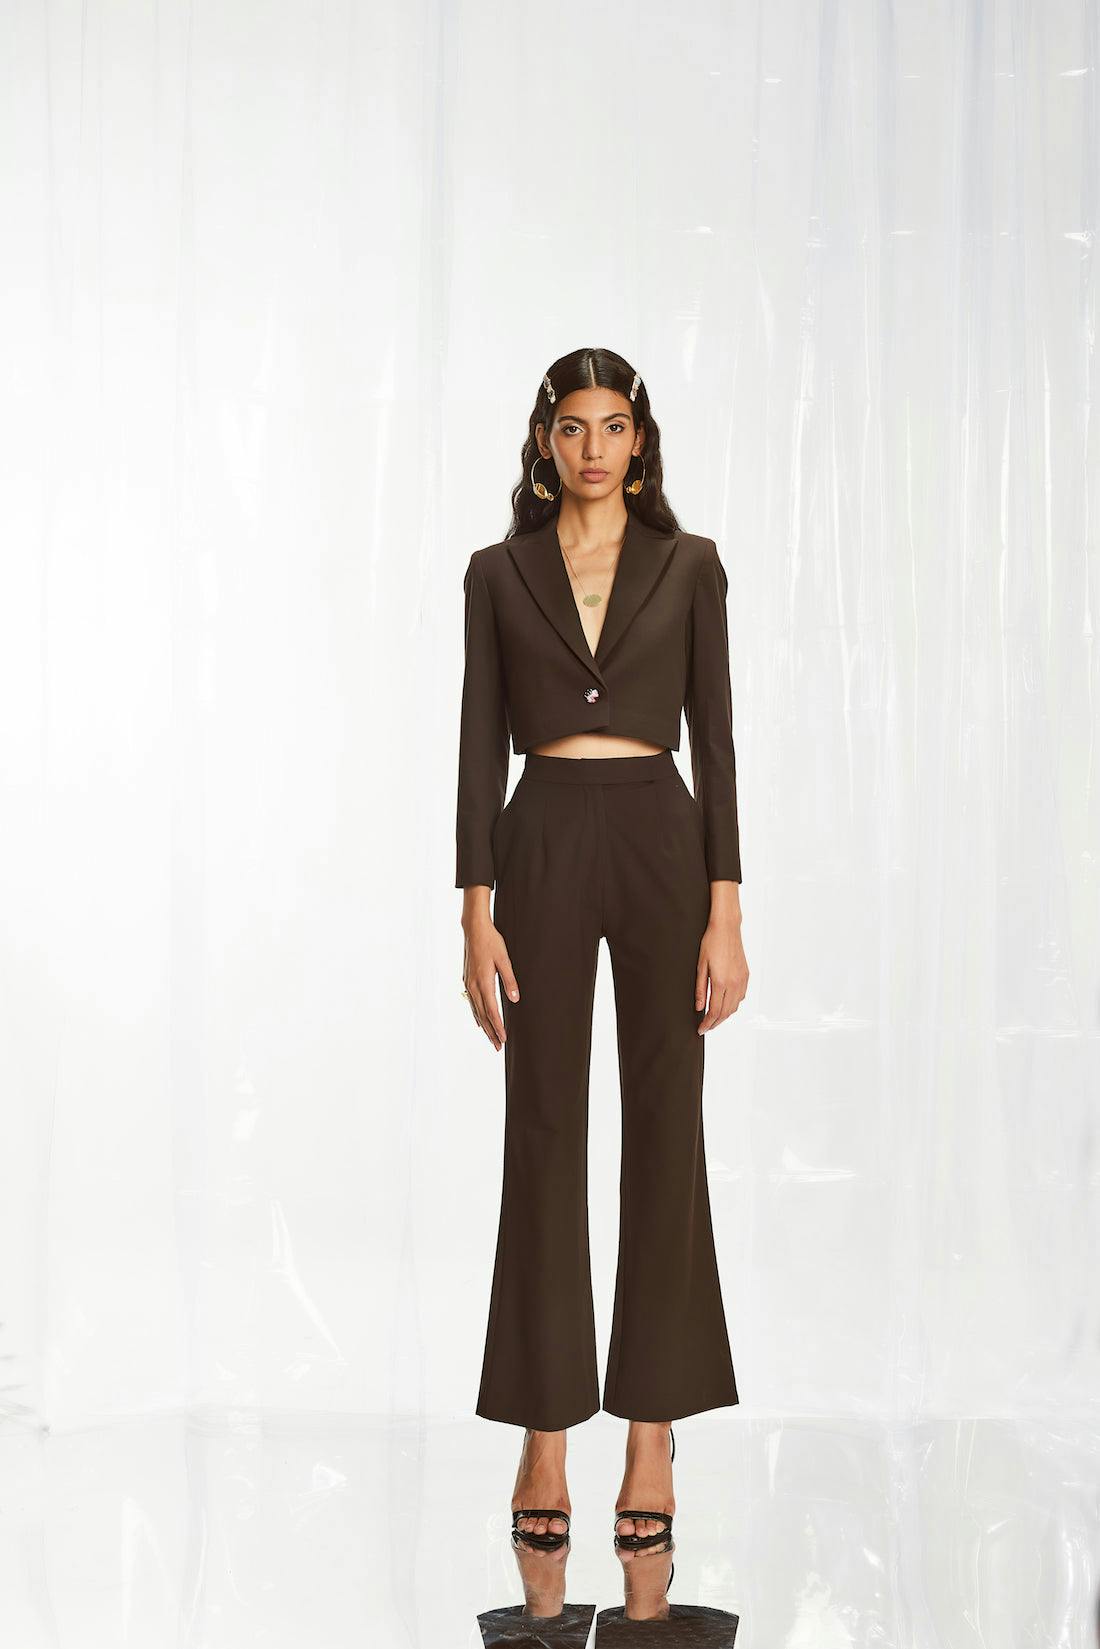 Statement Tailored Trousers, a product by Pocketful Of Cherrie